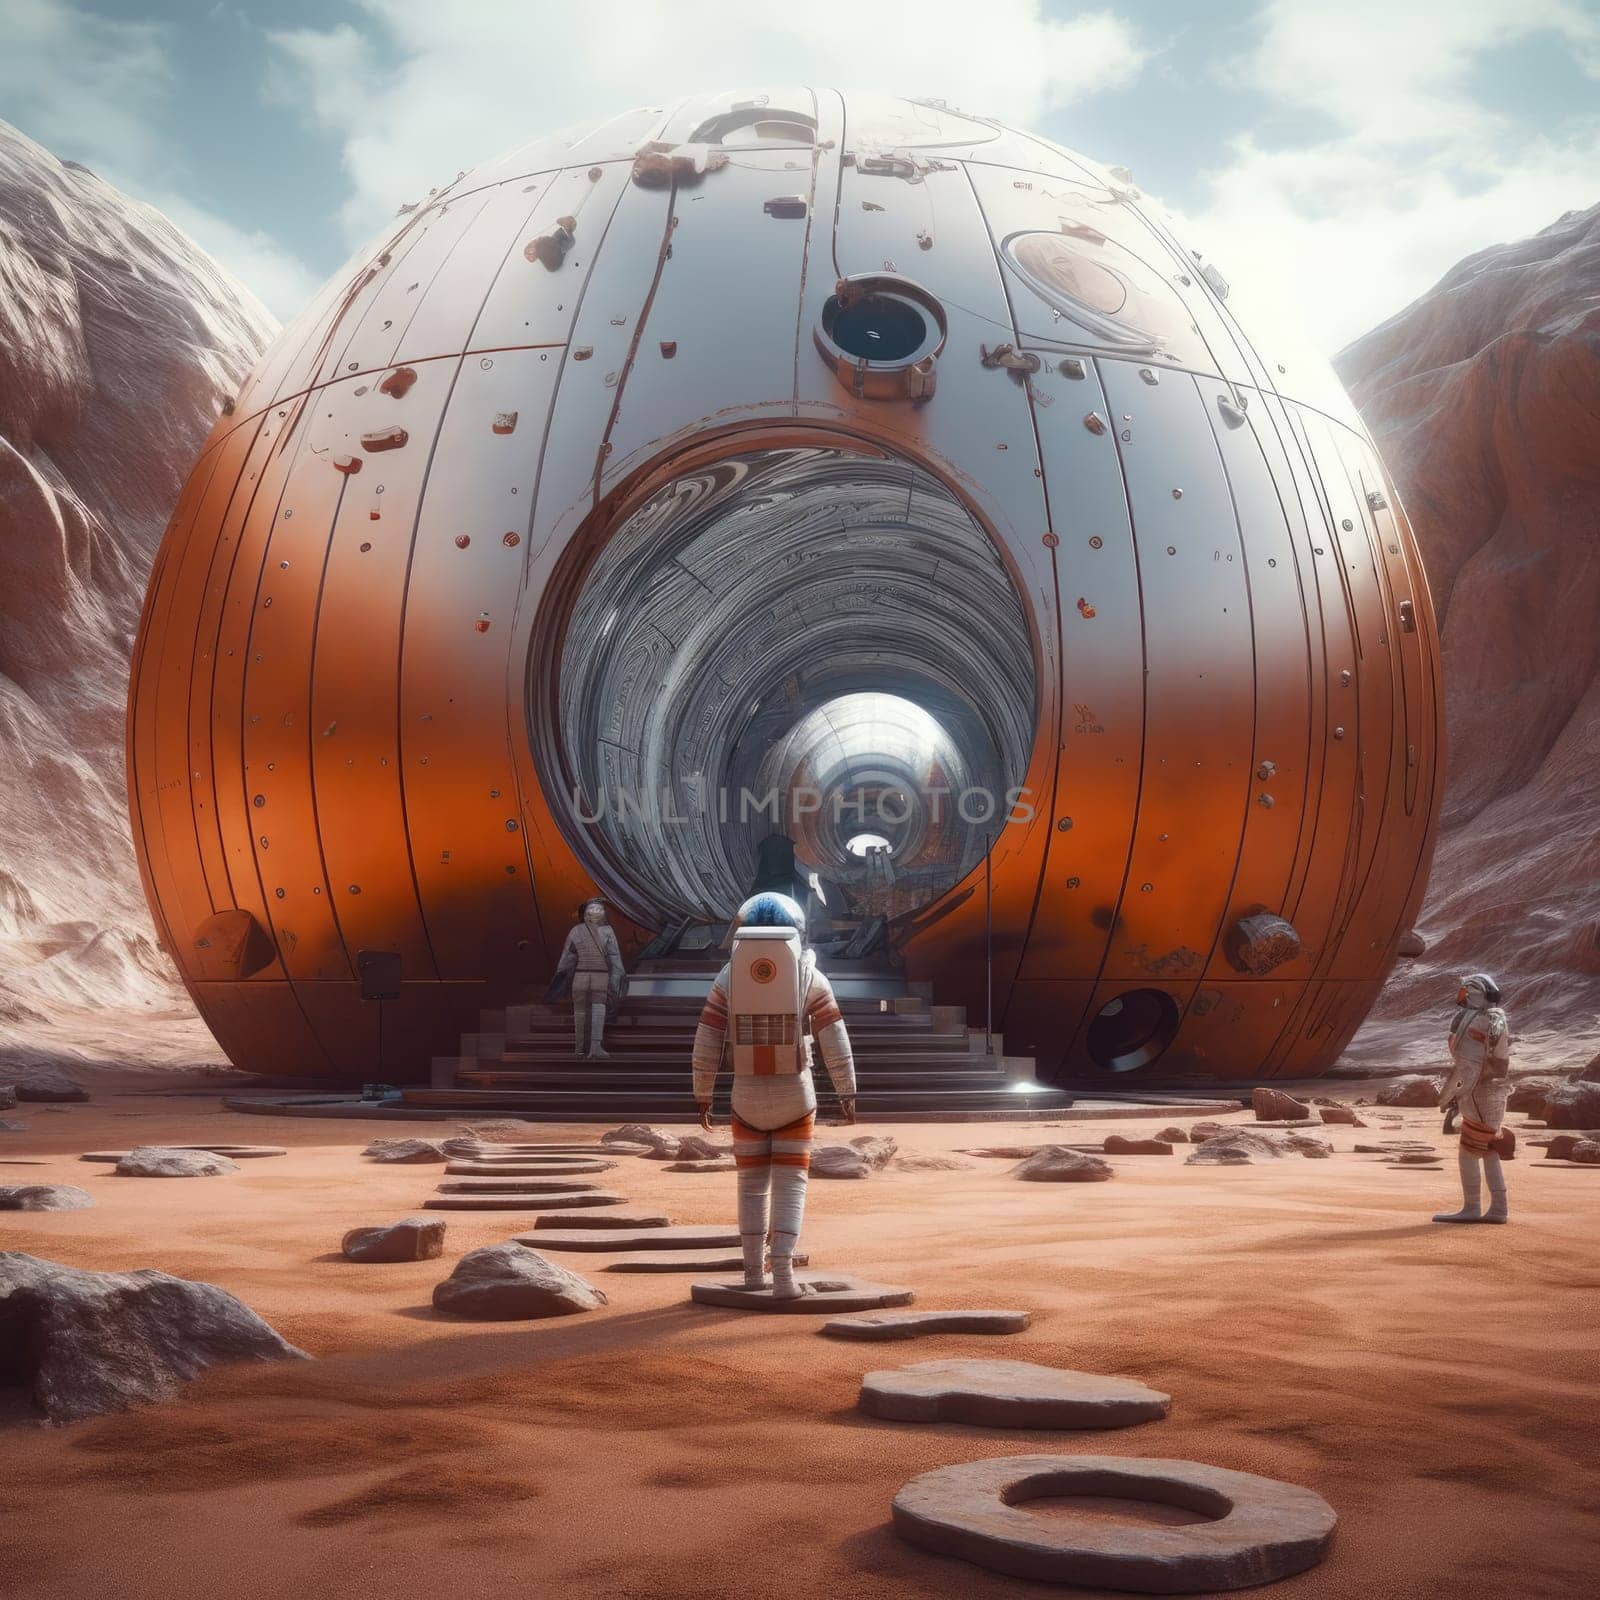 Astronauts on Mars. Station on Mars. The concept of colonization of Mars